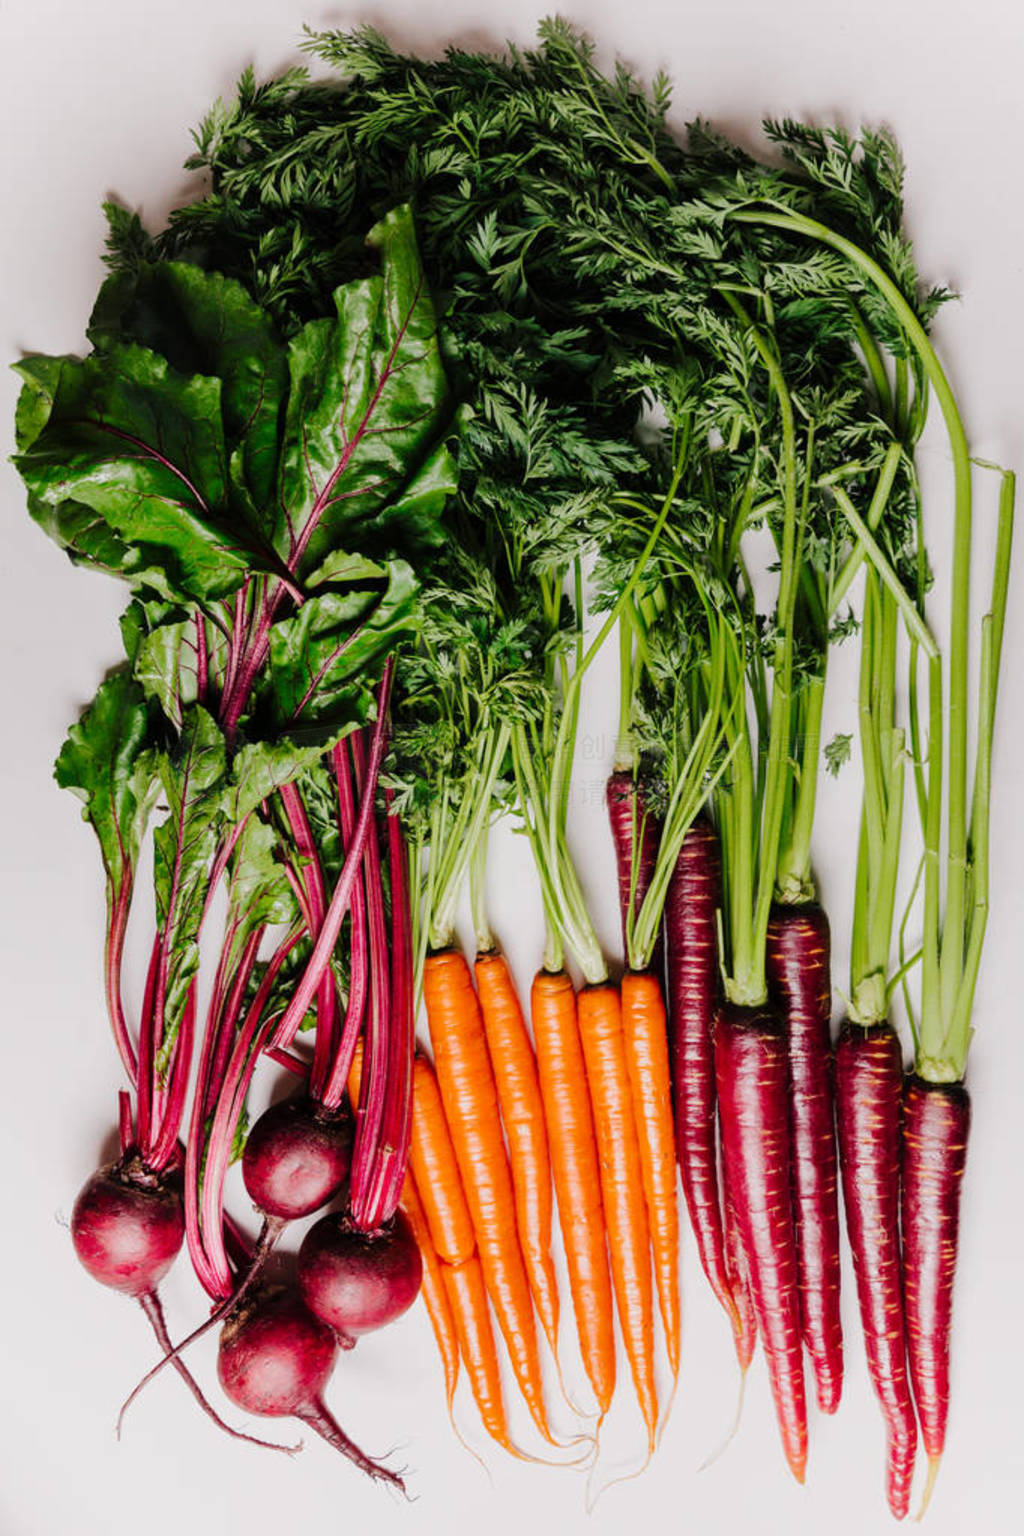 An assortment of loose raw beets and carrots